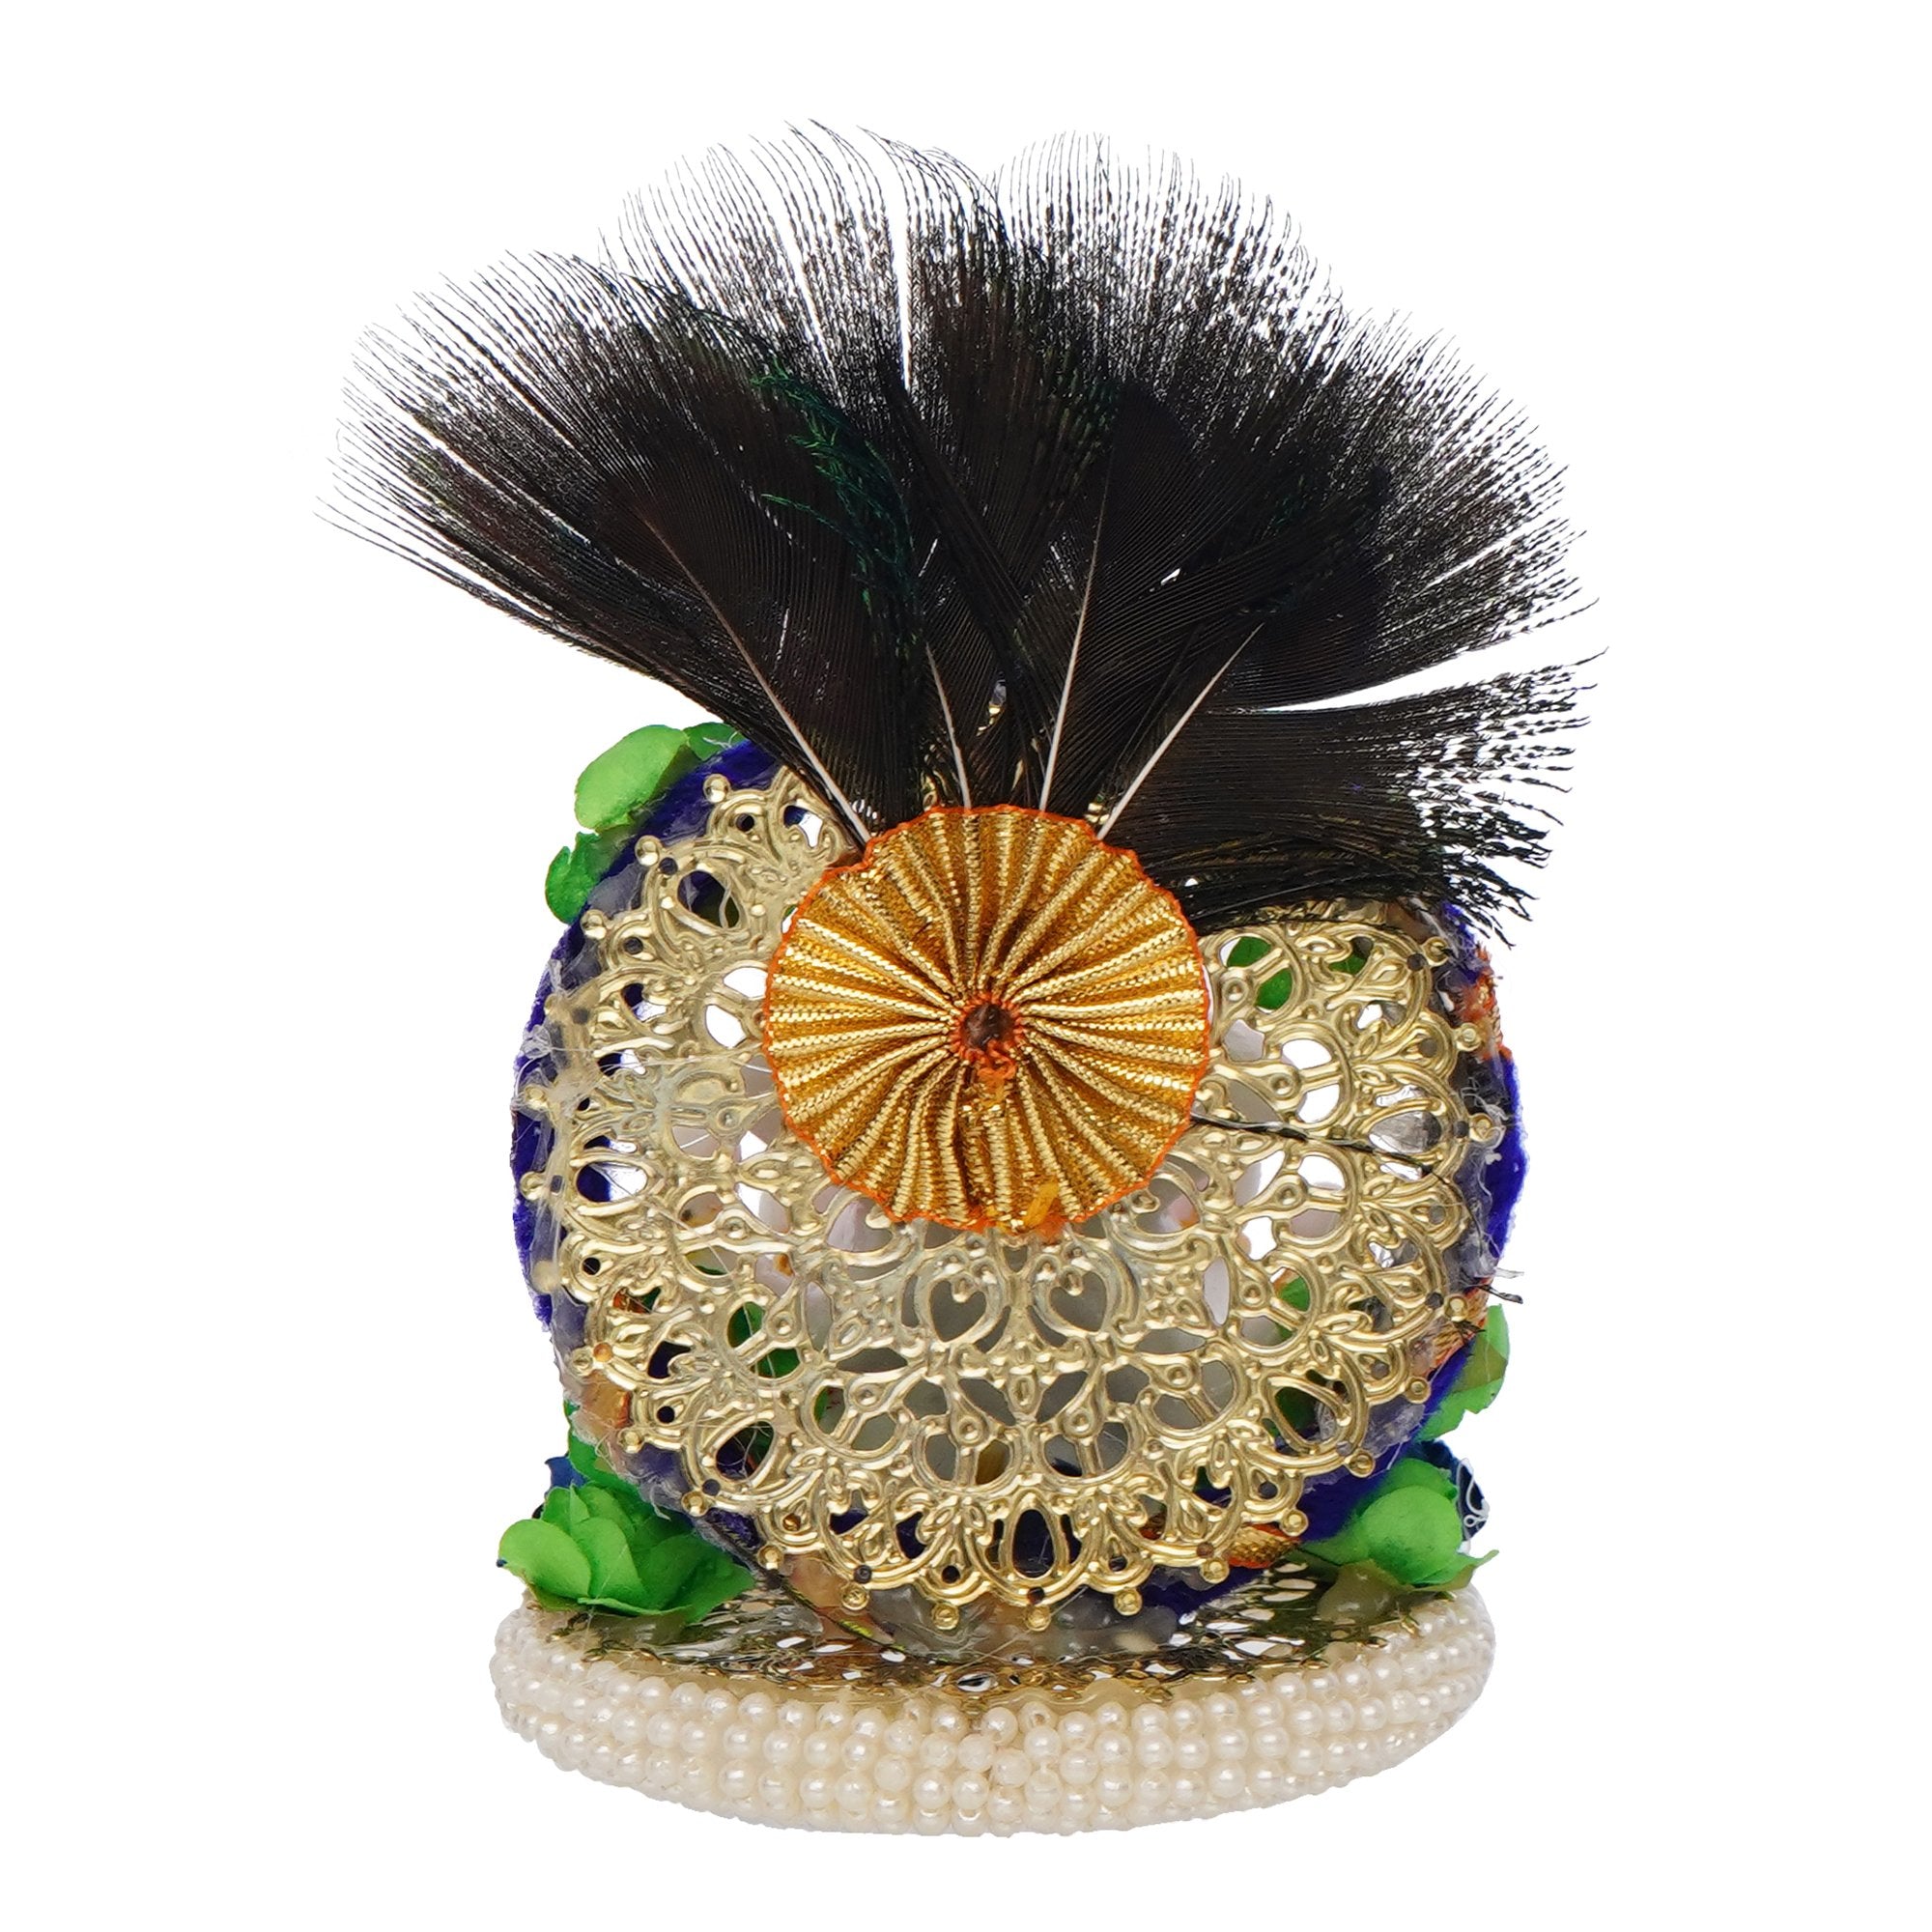 Polyresin Lord Ganesha Idol on Handcrafted Peacock Feather Floral Plate for Home and Car Dashboard 6